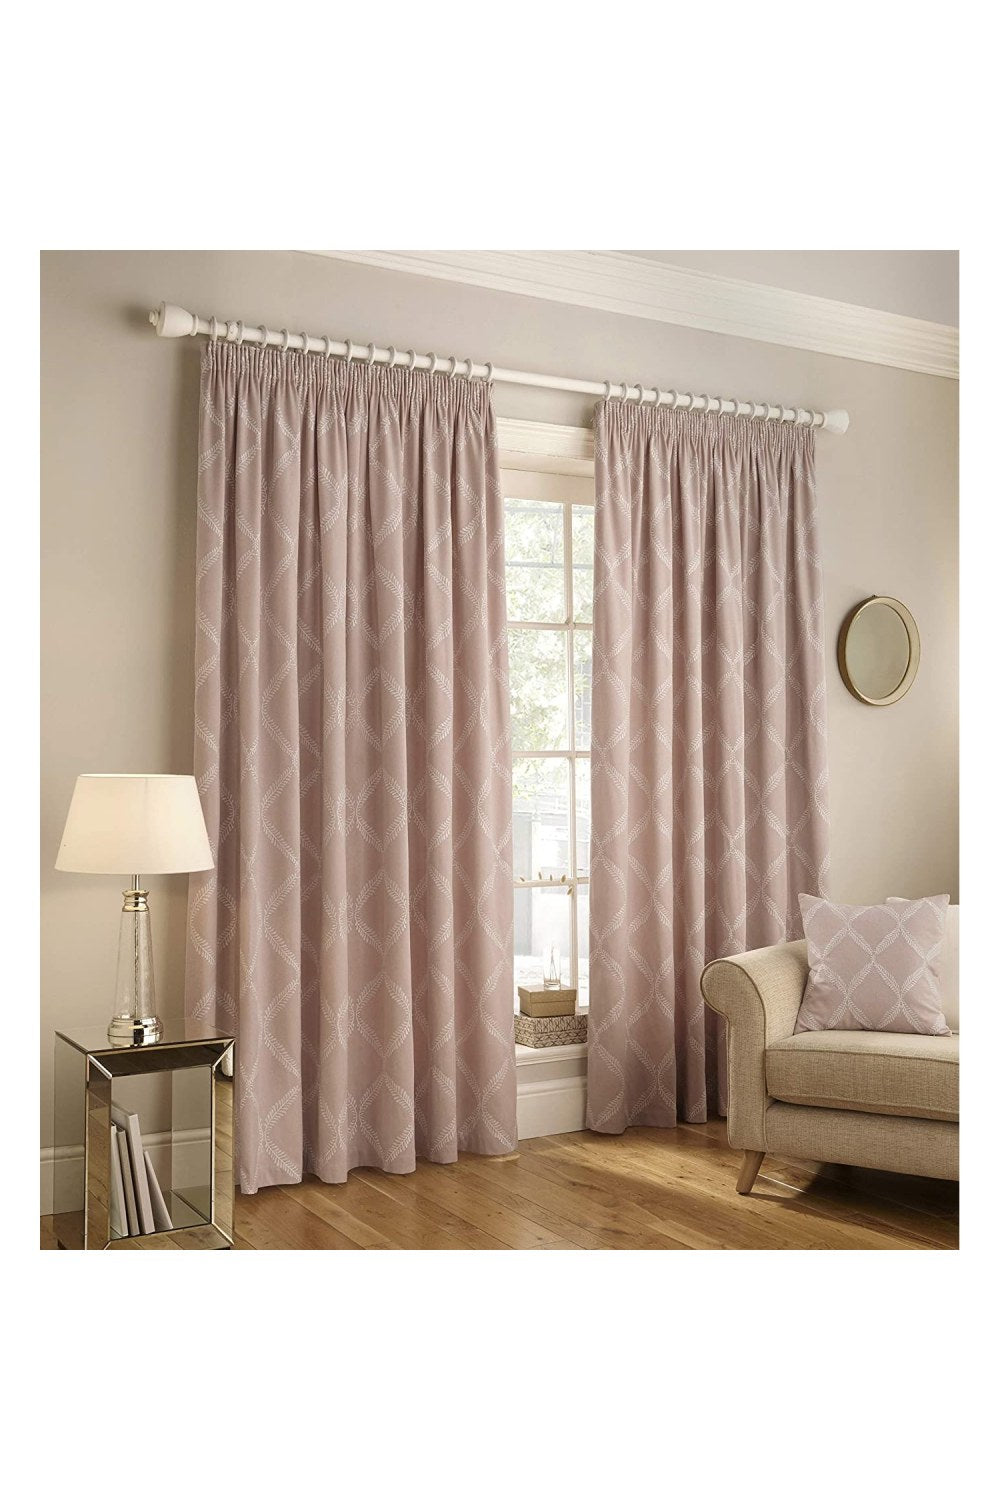 Paoletti Olivia Pencil Pleat Curtains (Blush Red) (66in x 90in)